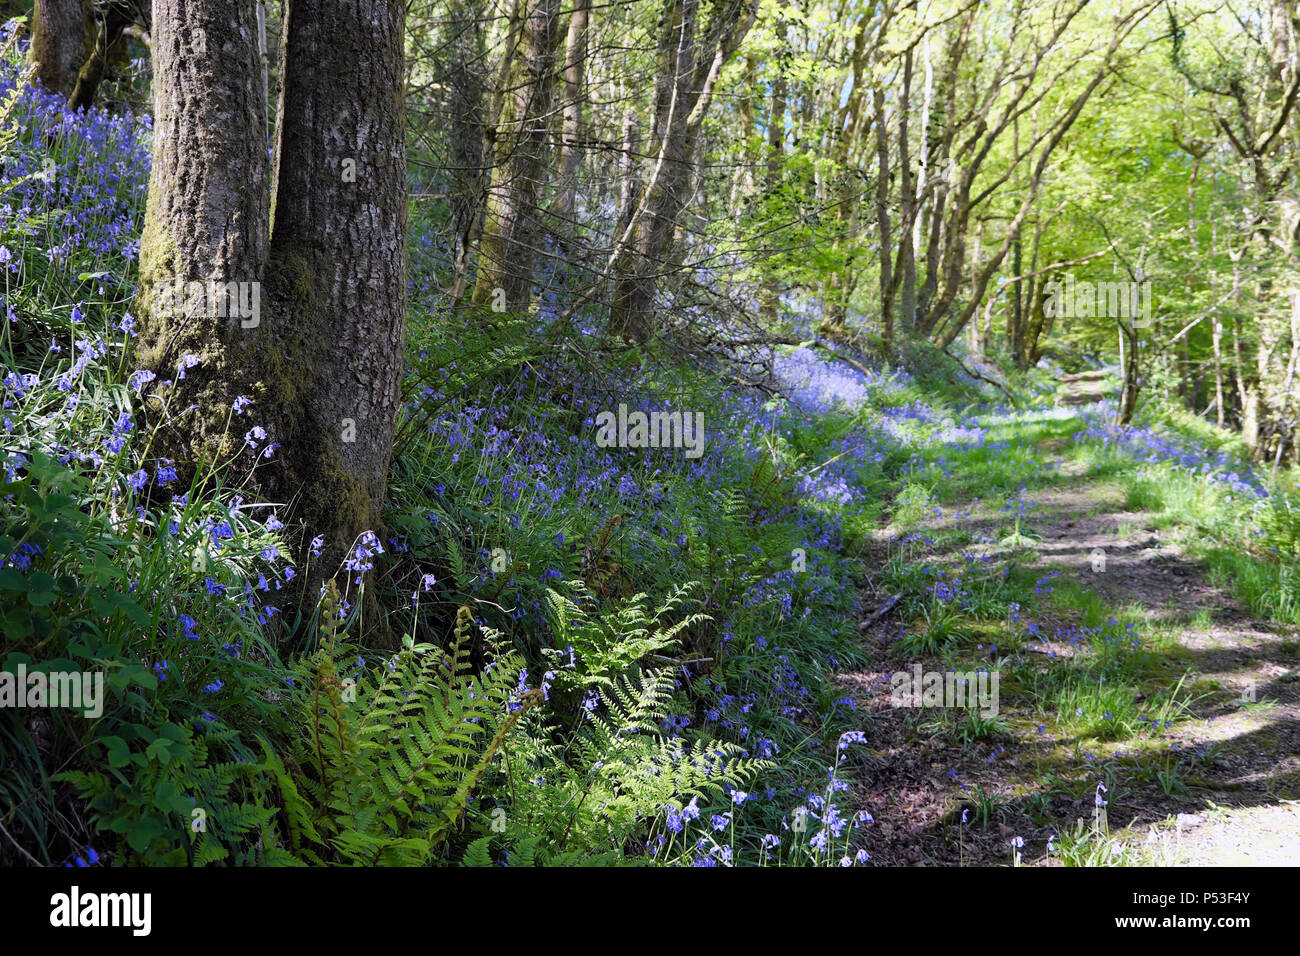 View of bluebells growing in a woodland on a slope by a rural track in the woods in spring Wales UK  KATHY DEWITT Stock Photo